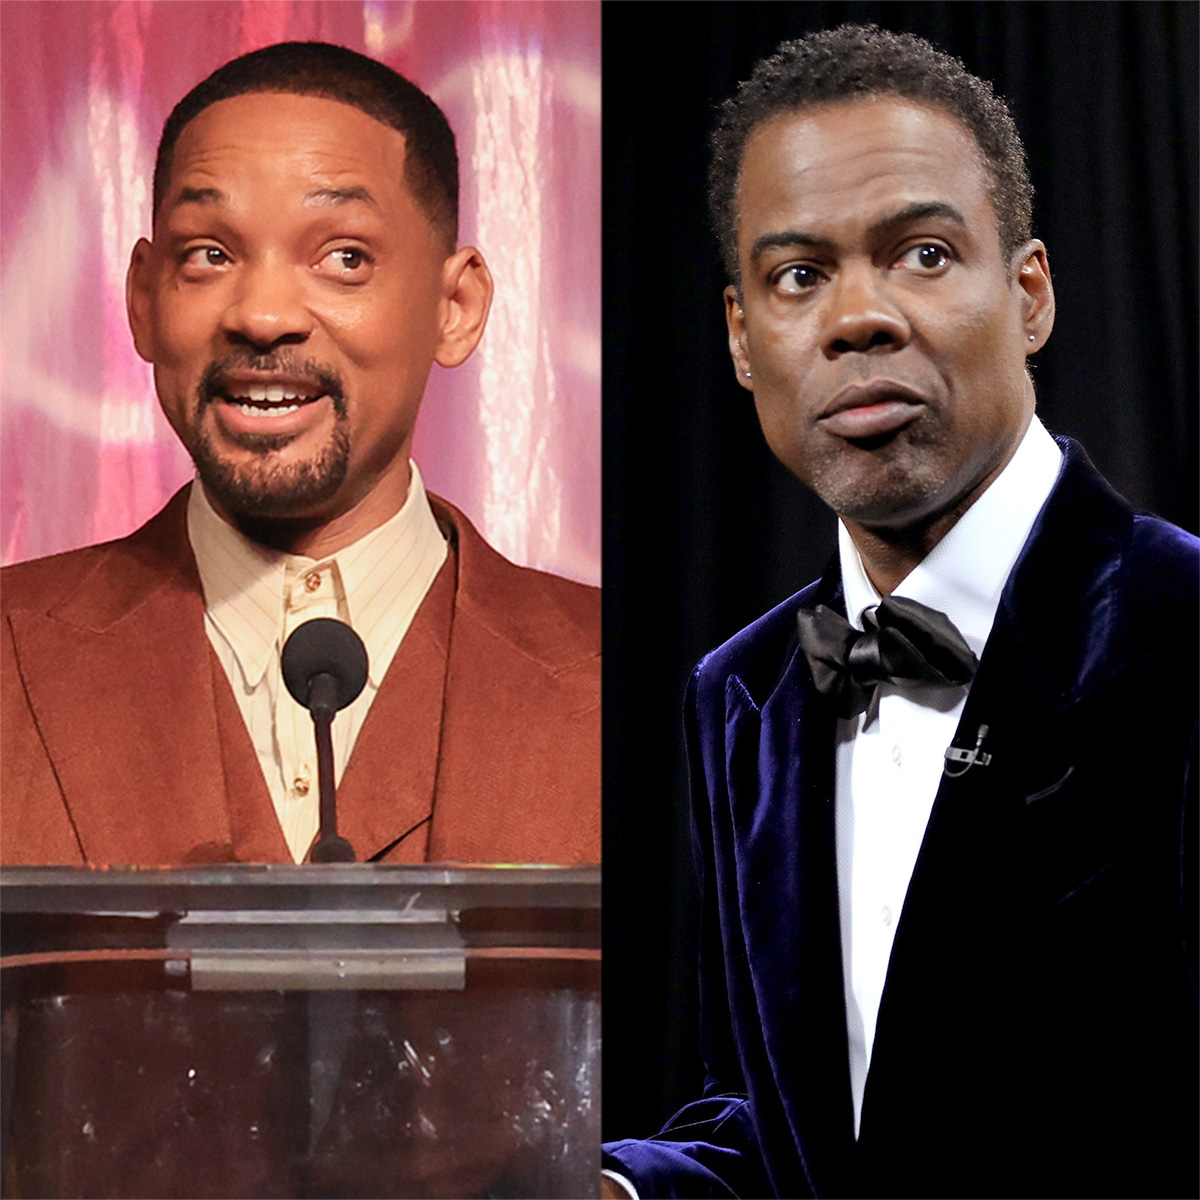 Will Smith Returns to an Award Show Stage Nearly One Year After Oscars Slap – E! Online